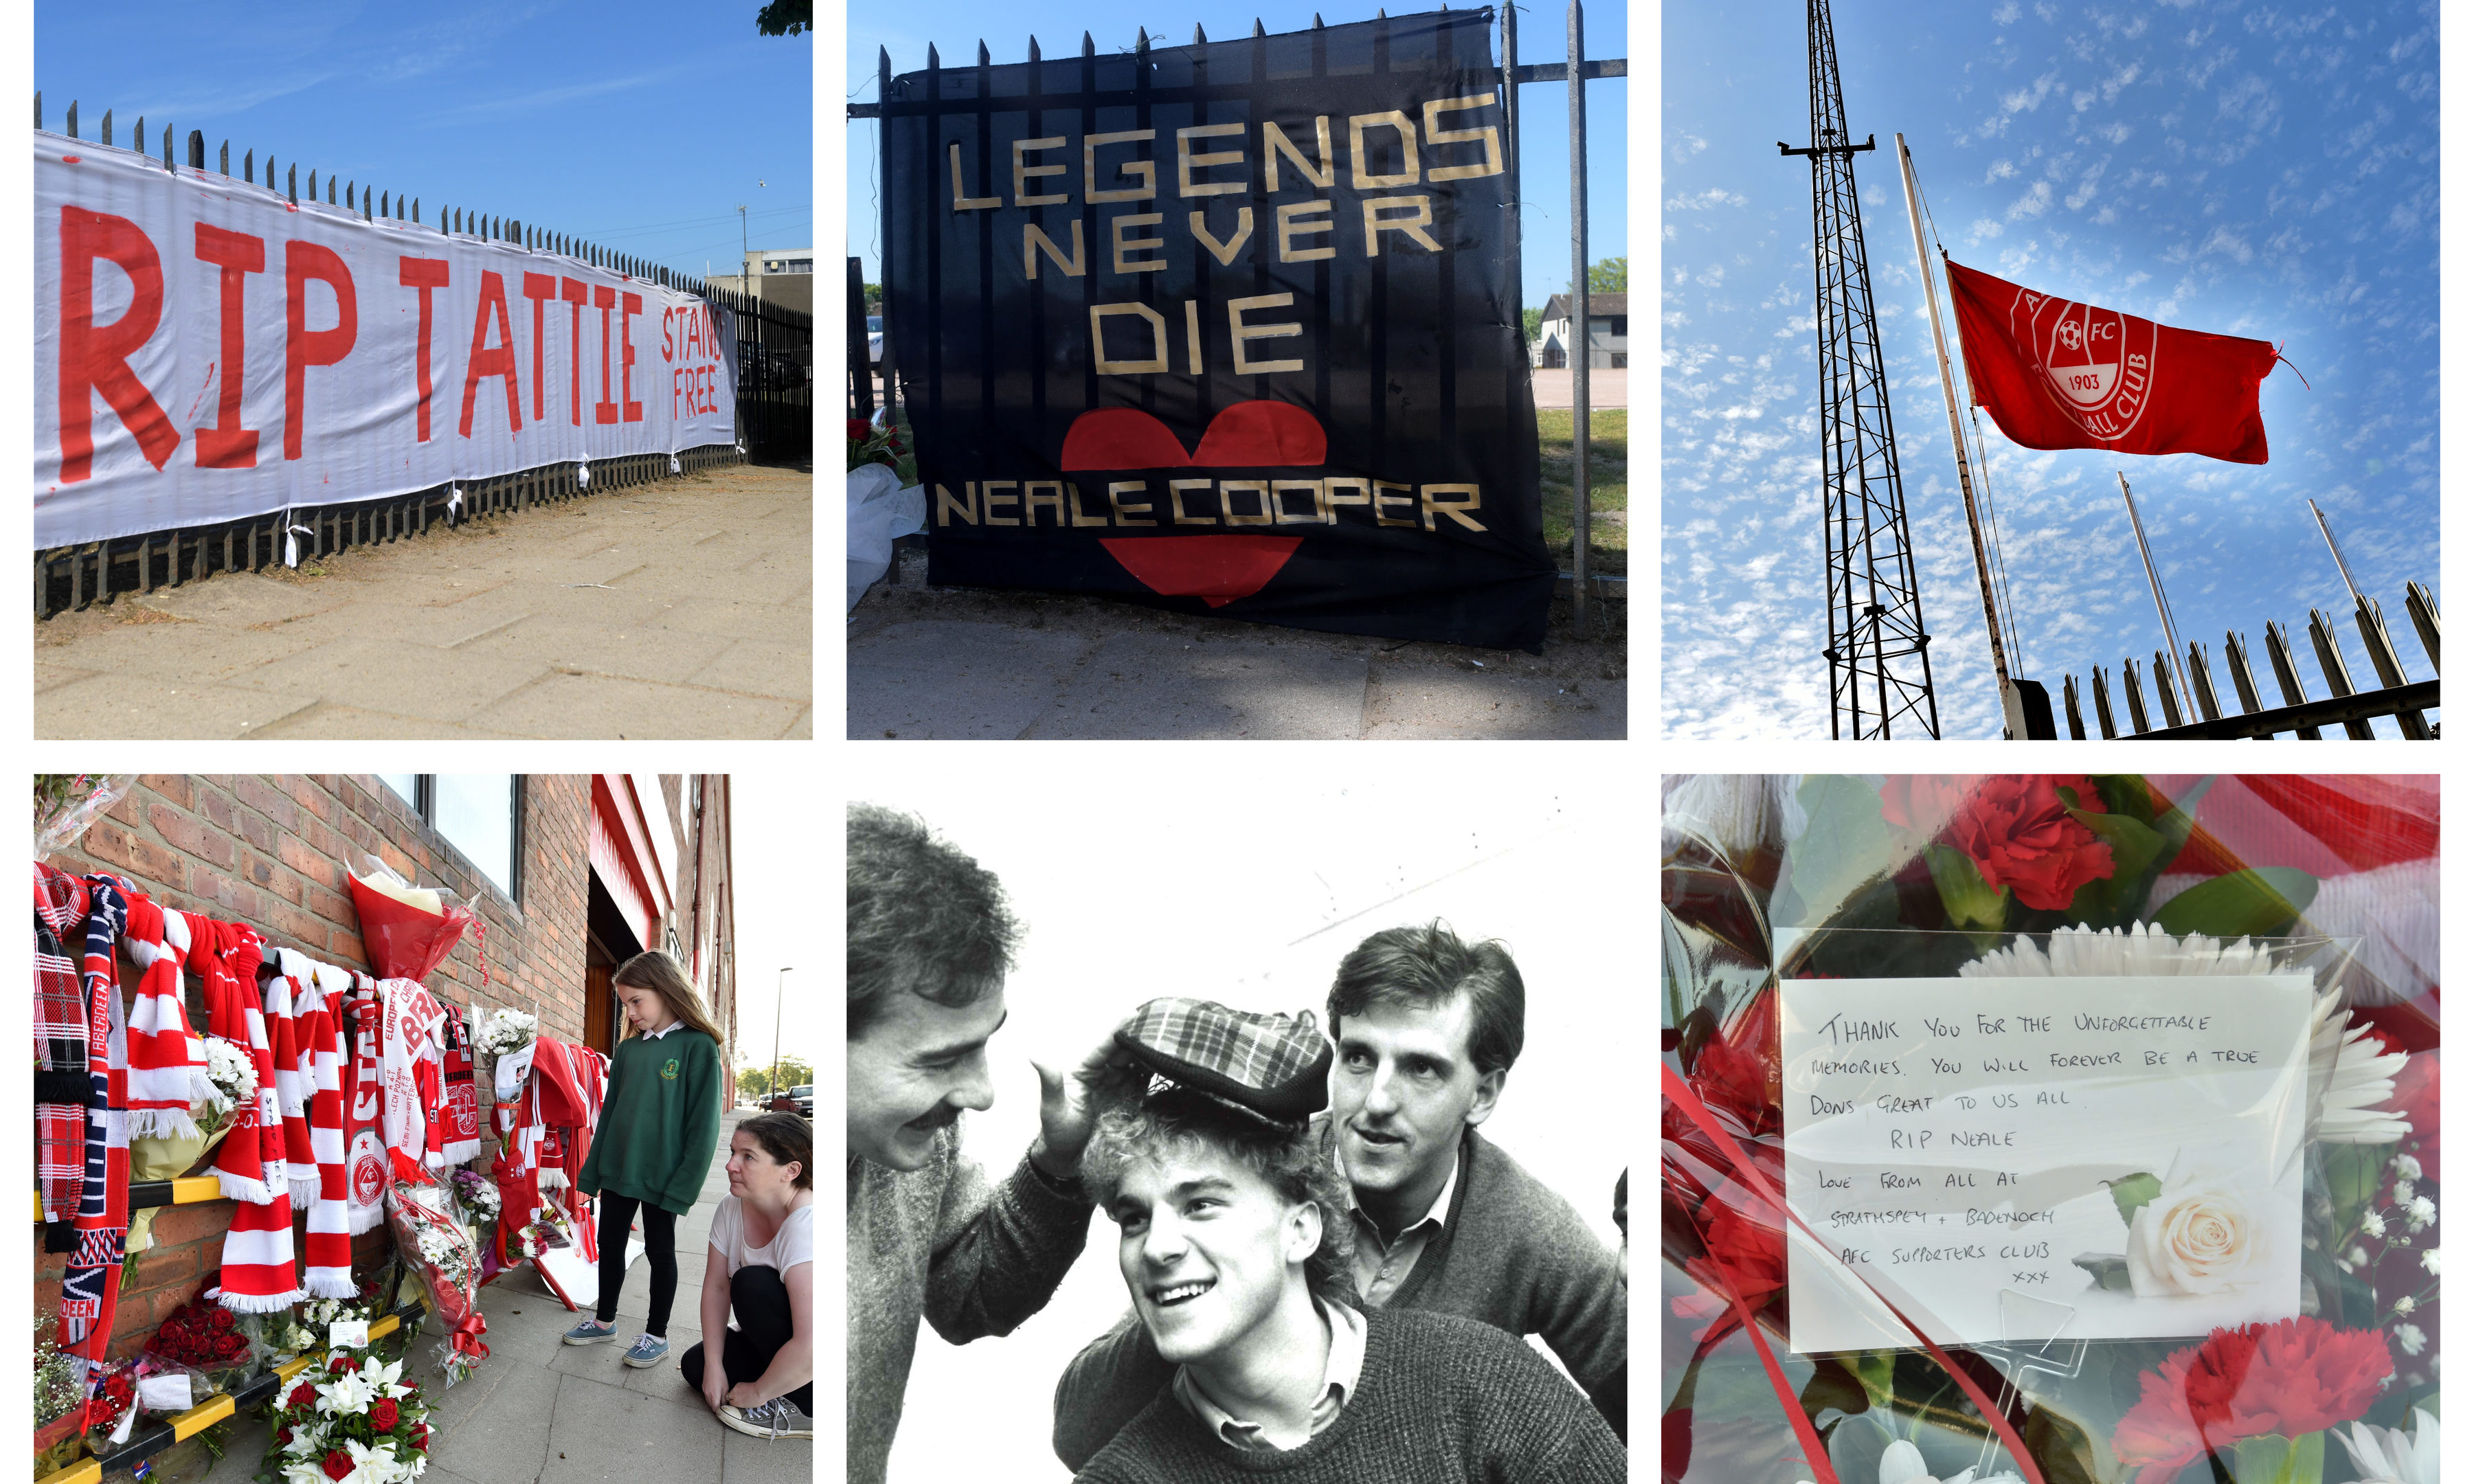 Tributes to Neale Cooper have appeared outside Pittodrie